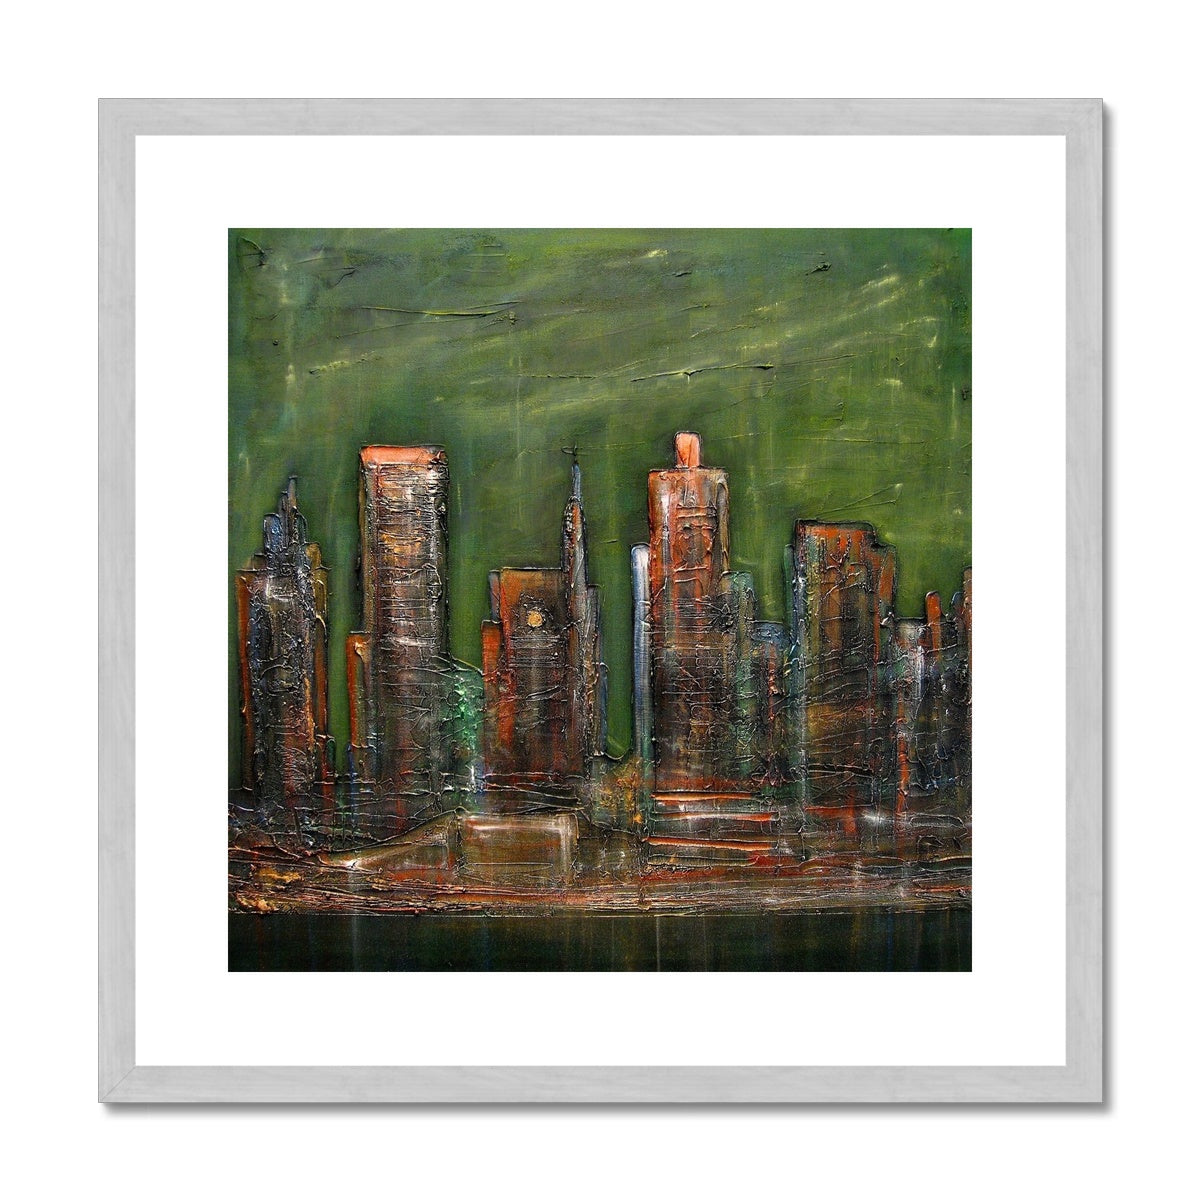 A Neon New York Painting | Antique Framed & Mounted Prints From Scotland-Antique Framed & Mounted Prints-World Art Gallery-20"x20"-Silver Frame-Paintings, Prints, Homeware, Art Gifts From Scotland By Scottish Artist Kevin Hunter